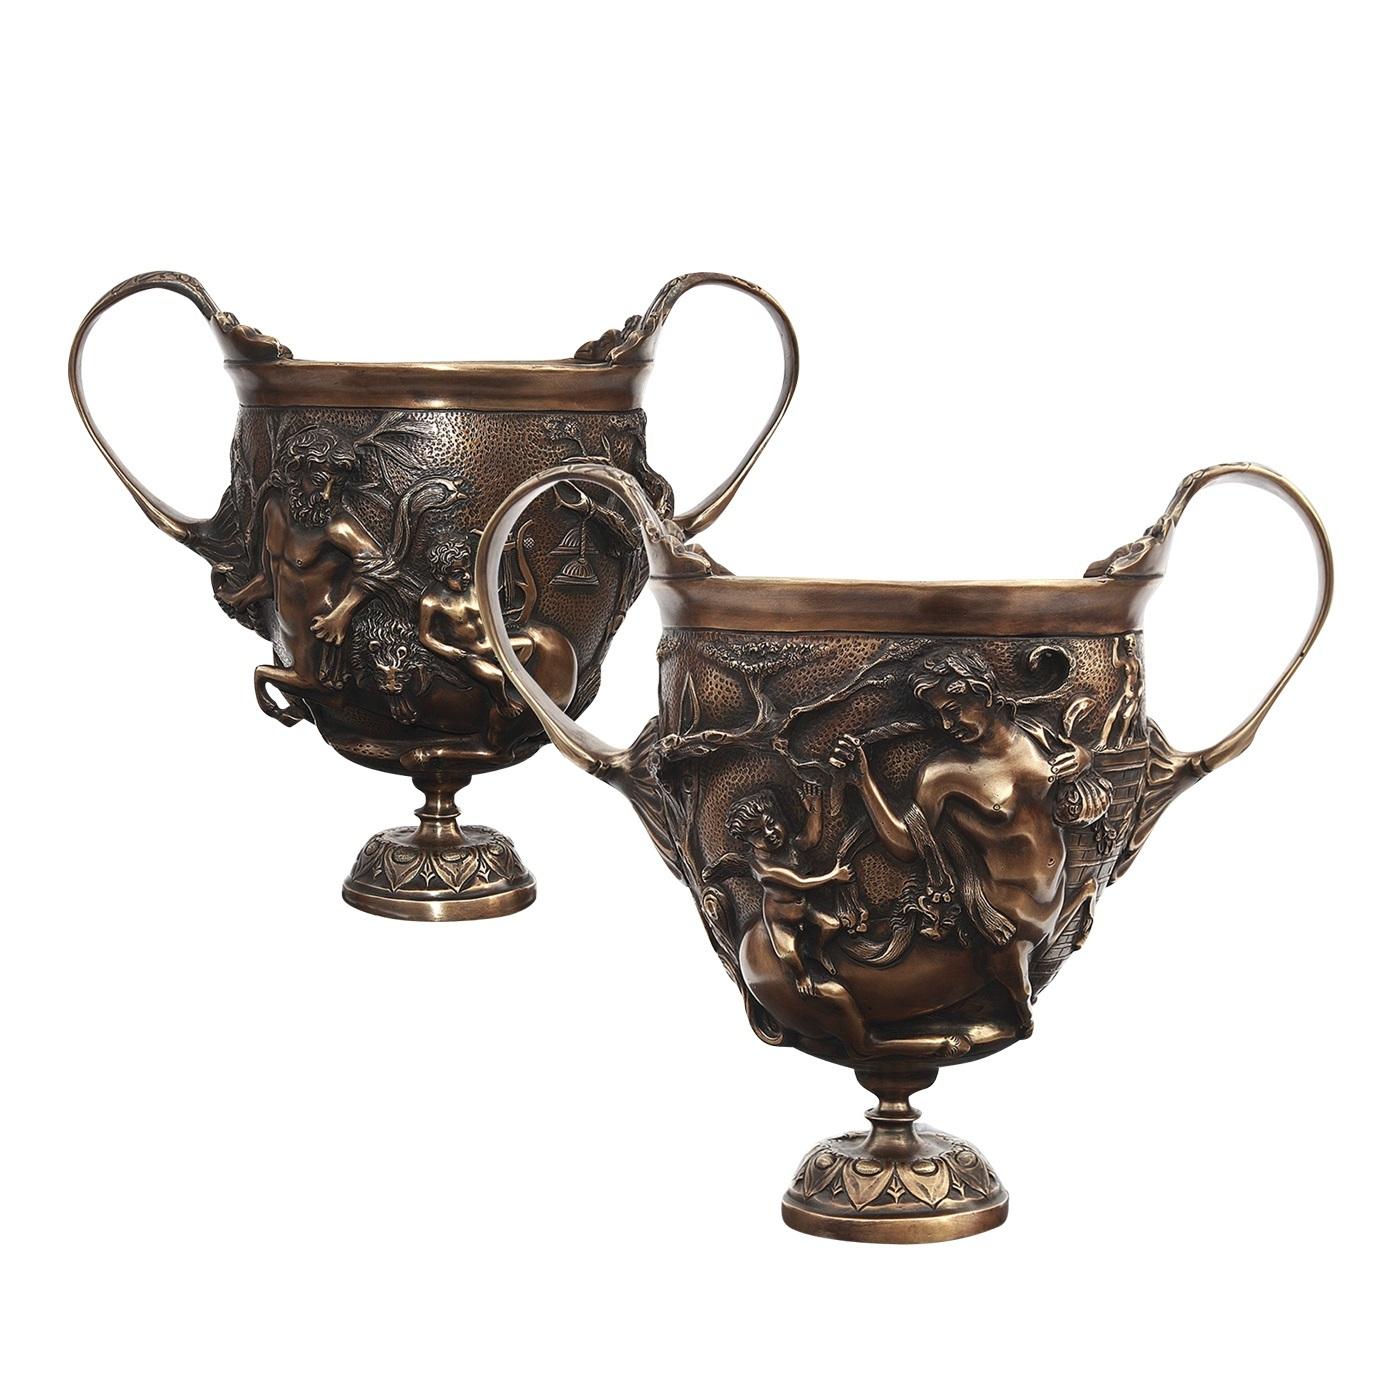 This set of two bronze goblets is an accurate reproduction of ancient Roman silver glasses found in the ruins of Pompei and now on display at the National Archeological Museum of Naples. These elegant pieces feature a splendid bas relief depicting a